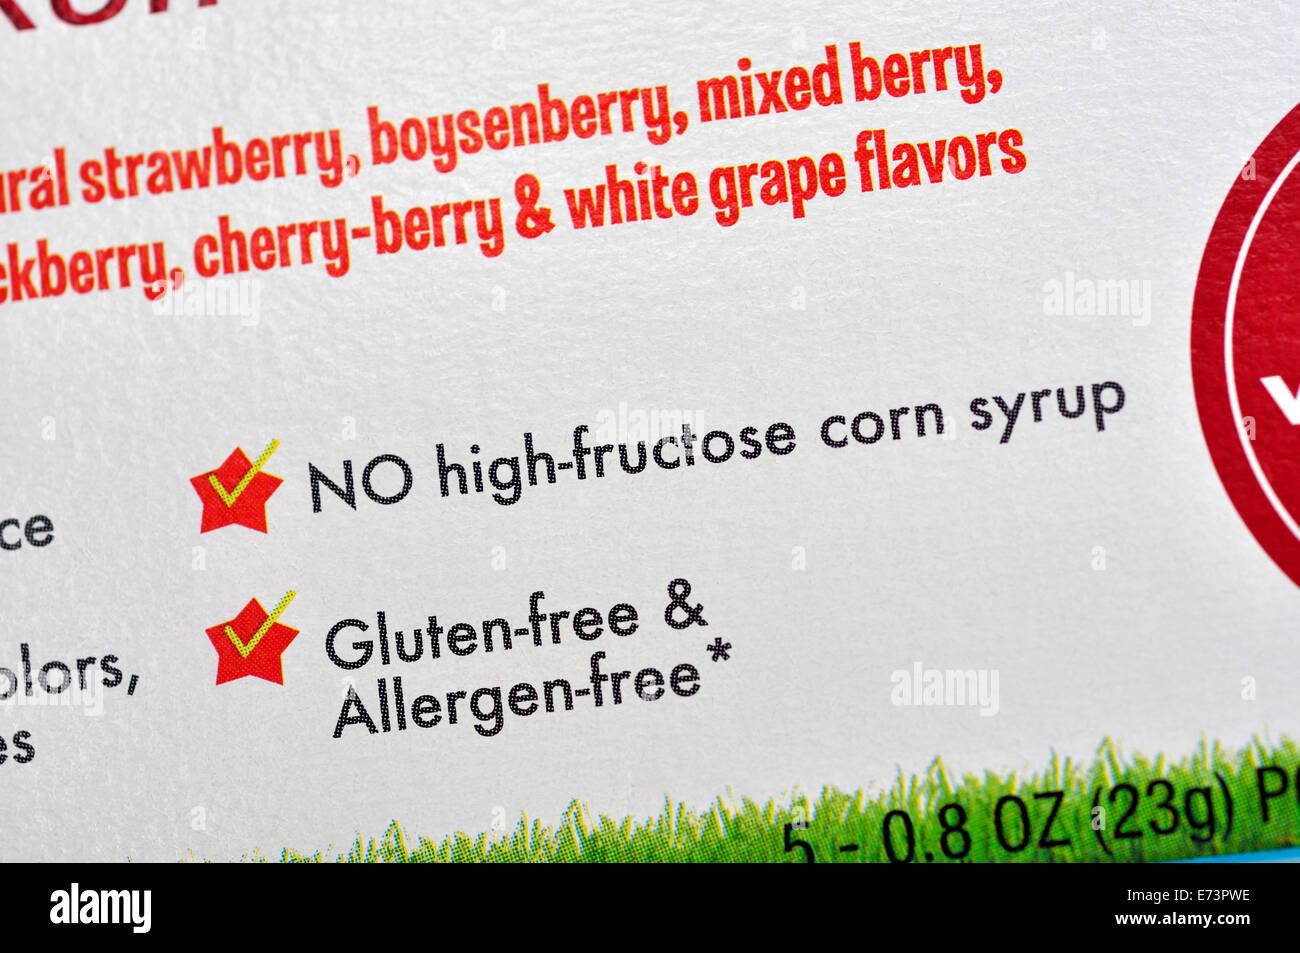 Gluten free and no high fructose corn syrup label on food package Stock Photo